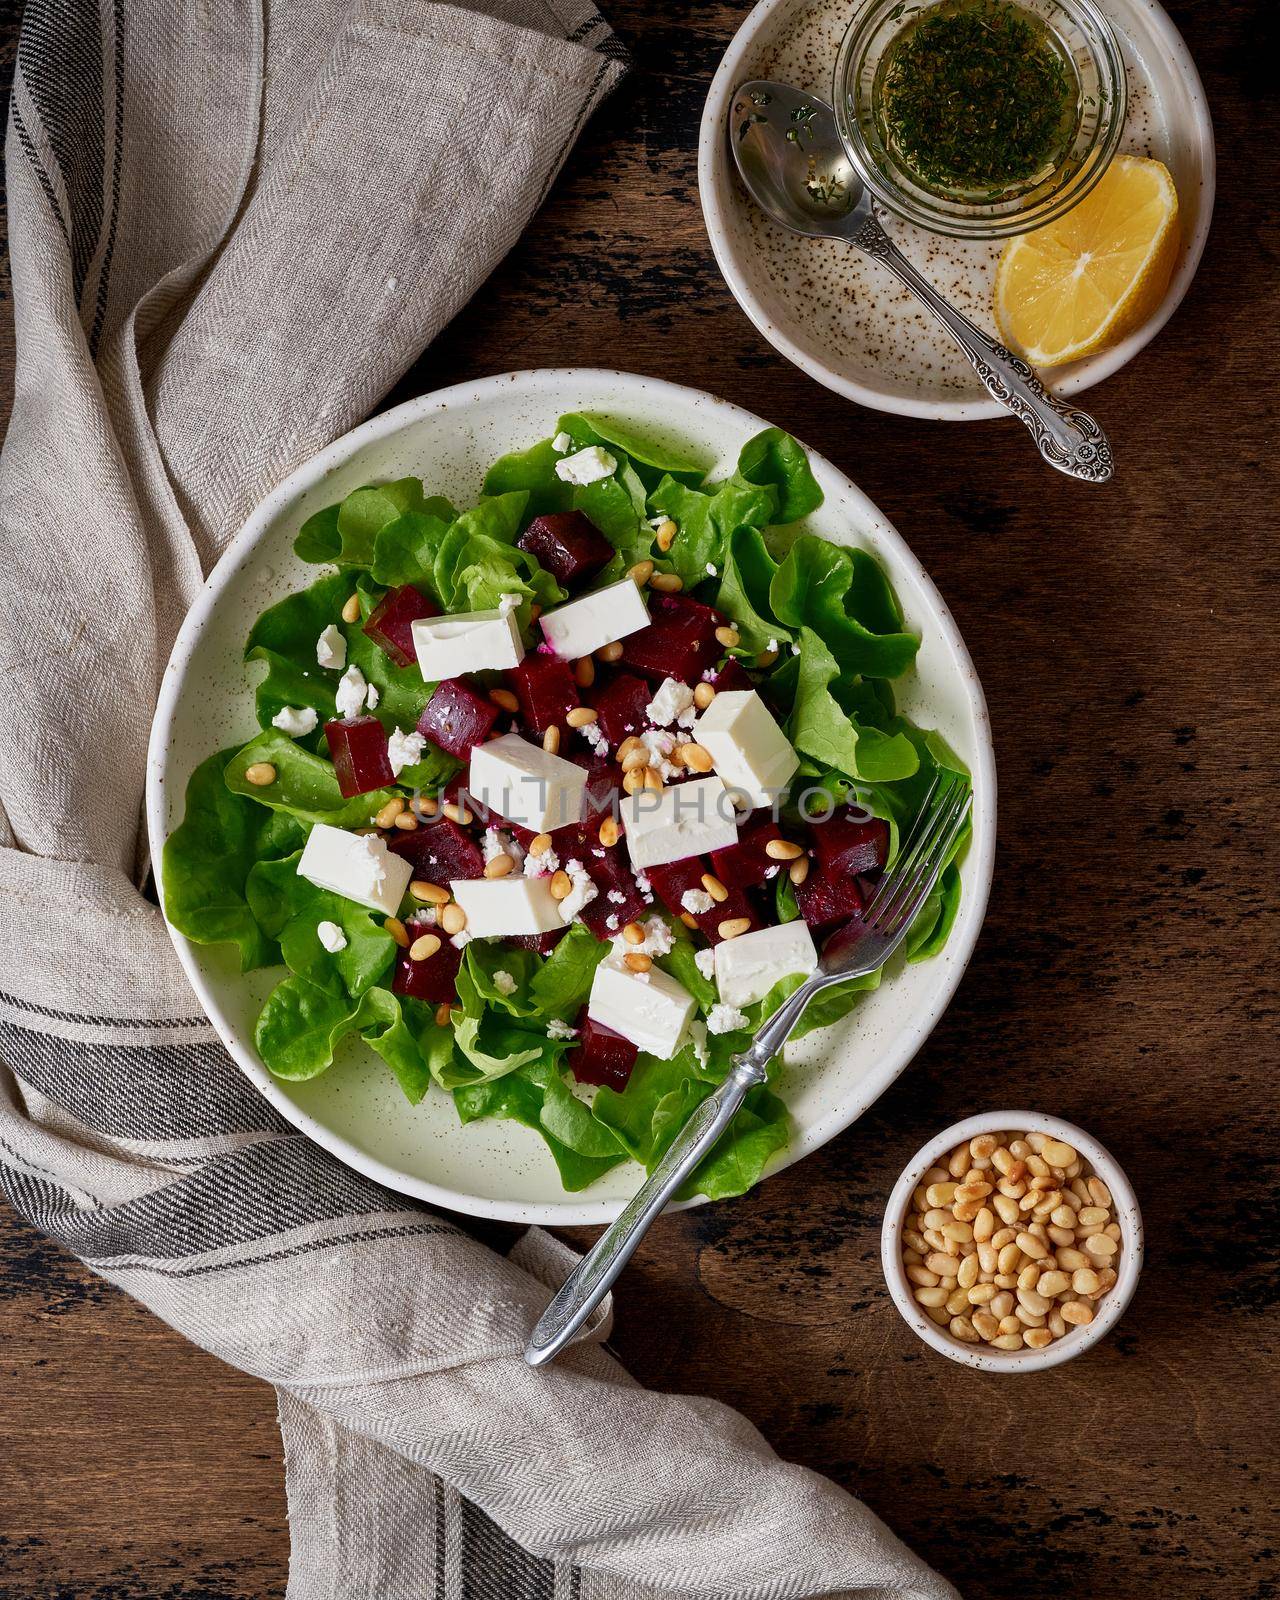 Healthy salad with beet, curd, feta and pine nuts, lettuce. Low carb keto ketogenic dash diet. Dark food photography. Vertical, top view